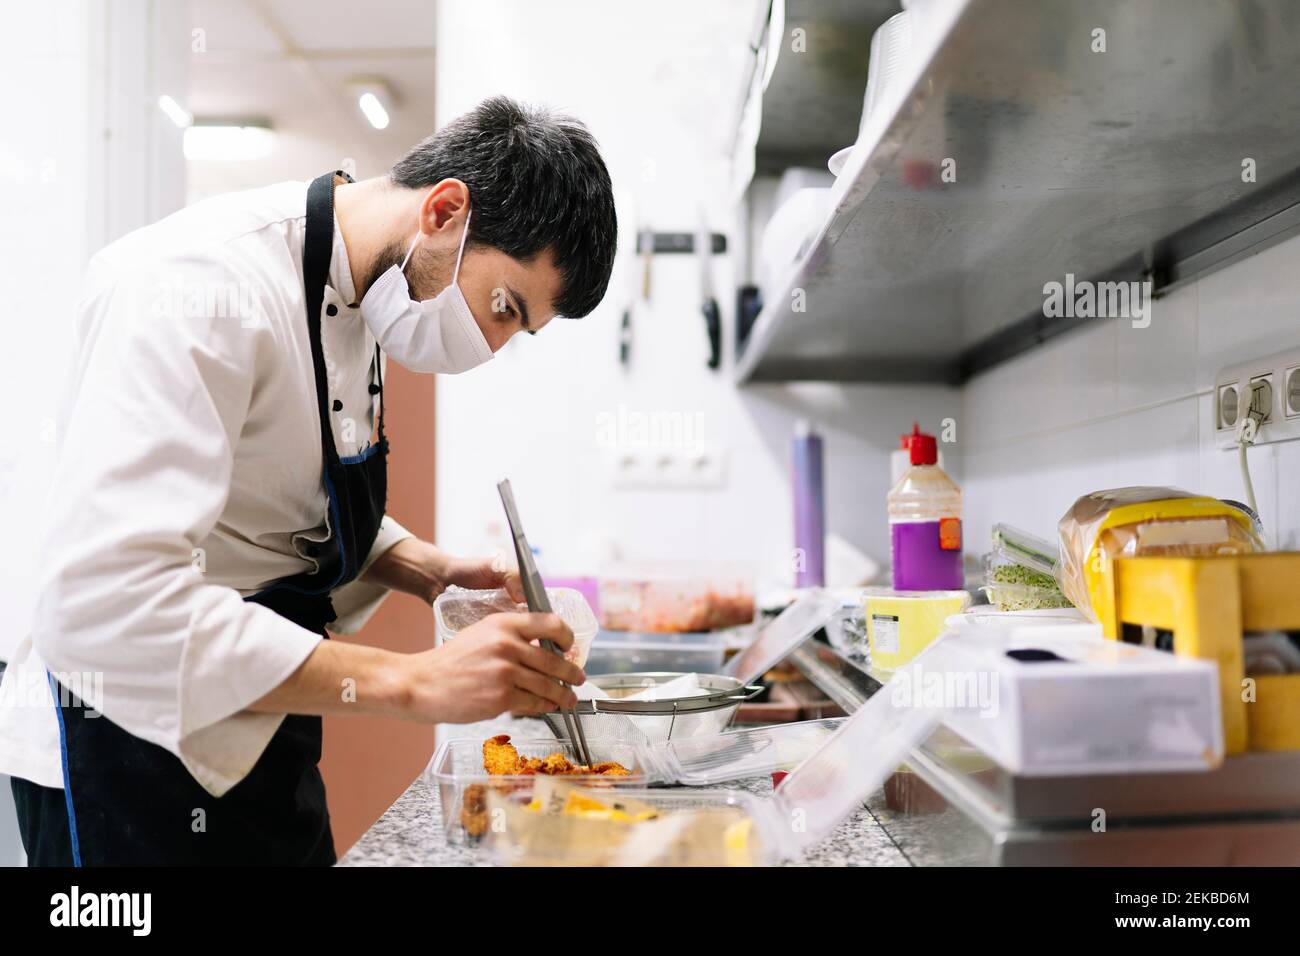 https://c8.alamy.com/comp/2EKBD6M/male-chef-preparing-food-in-plastic-containers-in-kitchen-at-restaurant-during-covid-19-2EKBD6M.jpg